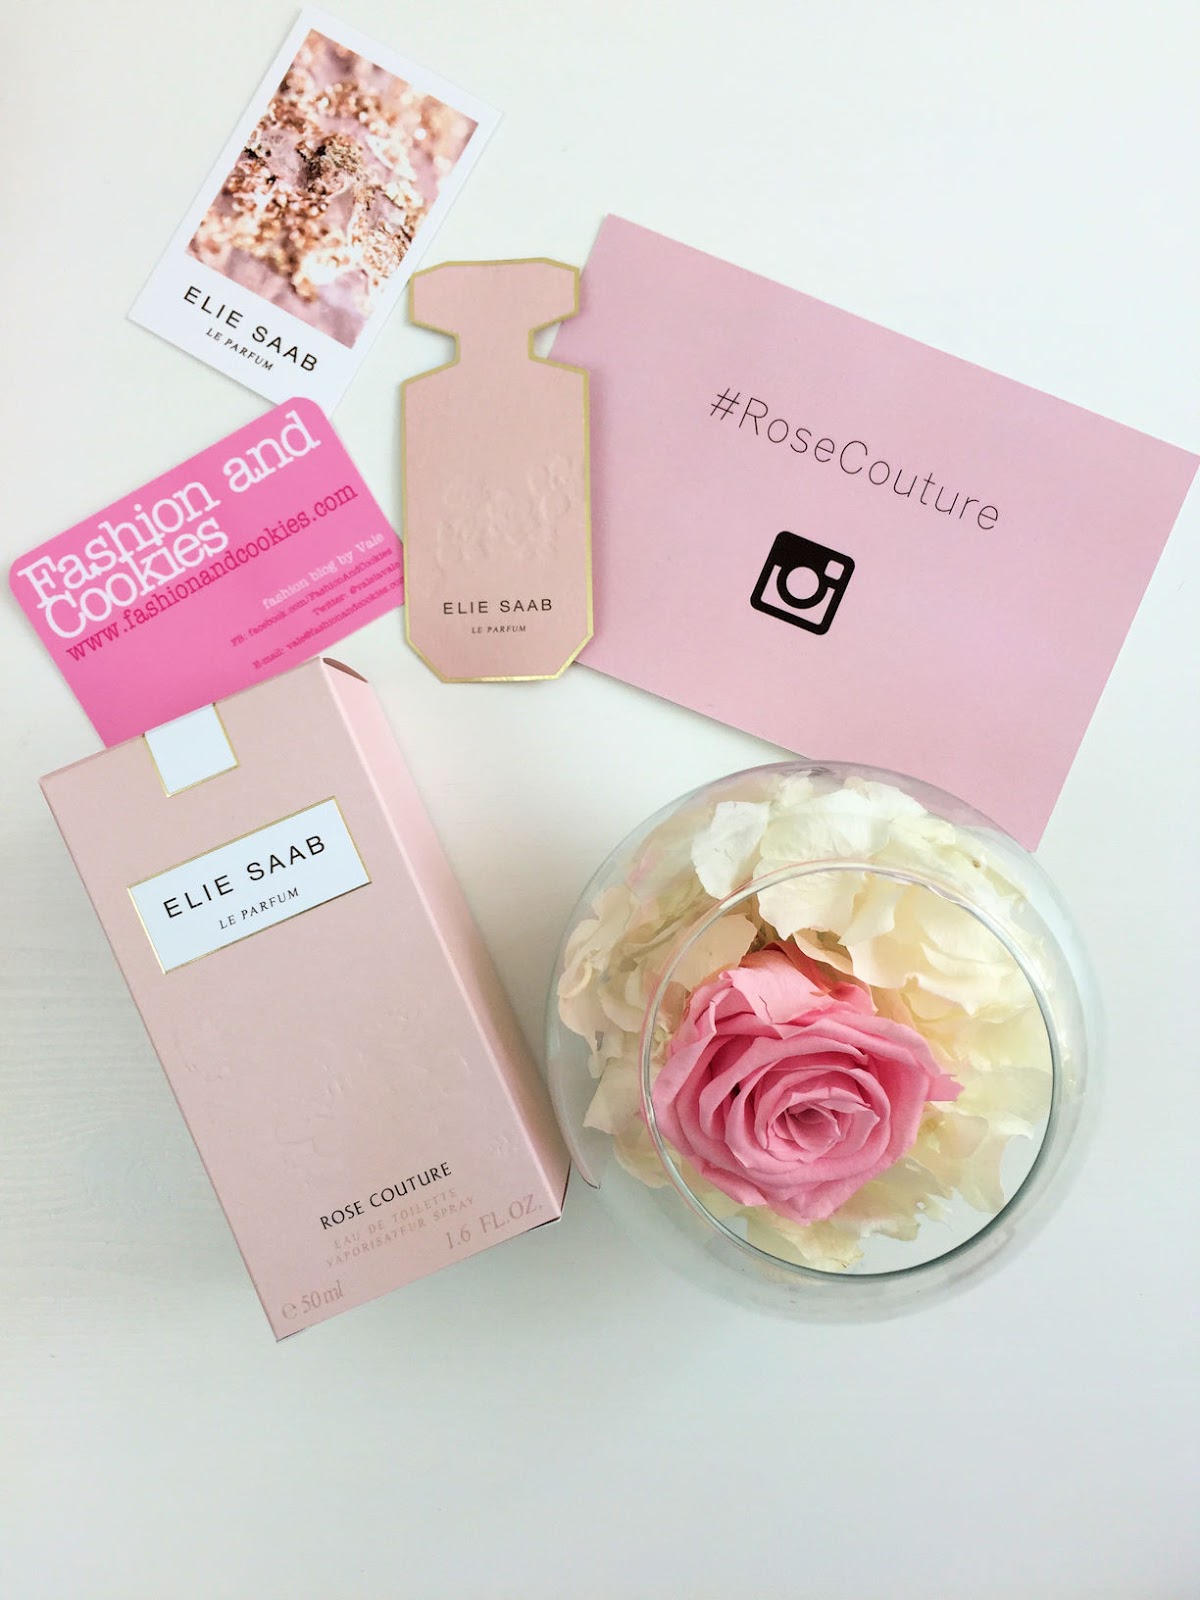 Elie Saab Rose Couture new fragrance, review and presentation on Fashion and Cookies fashion and beauty blog, beauty blogger